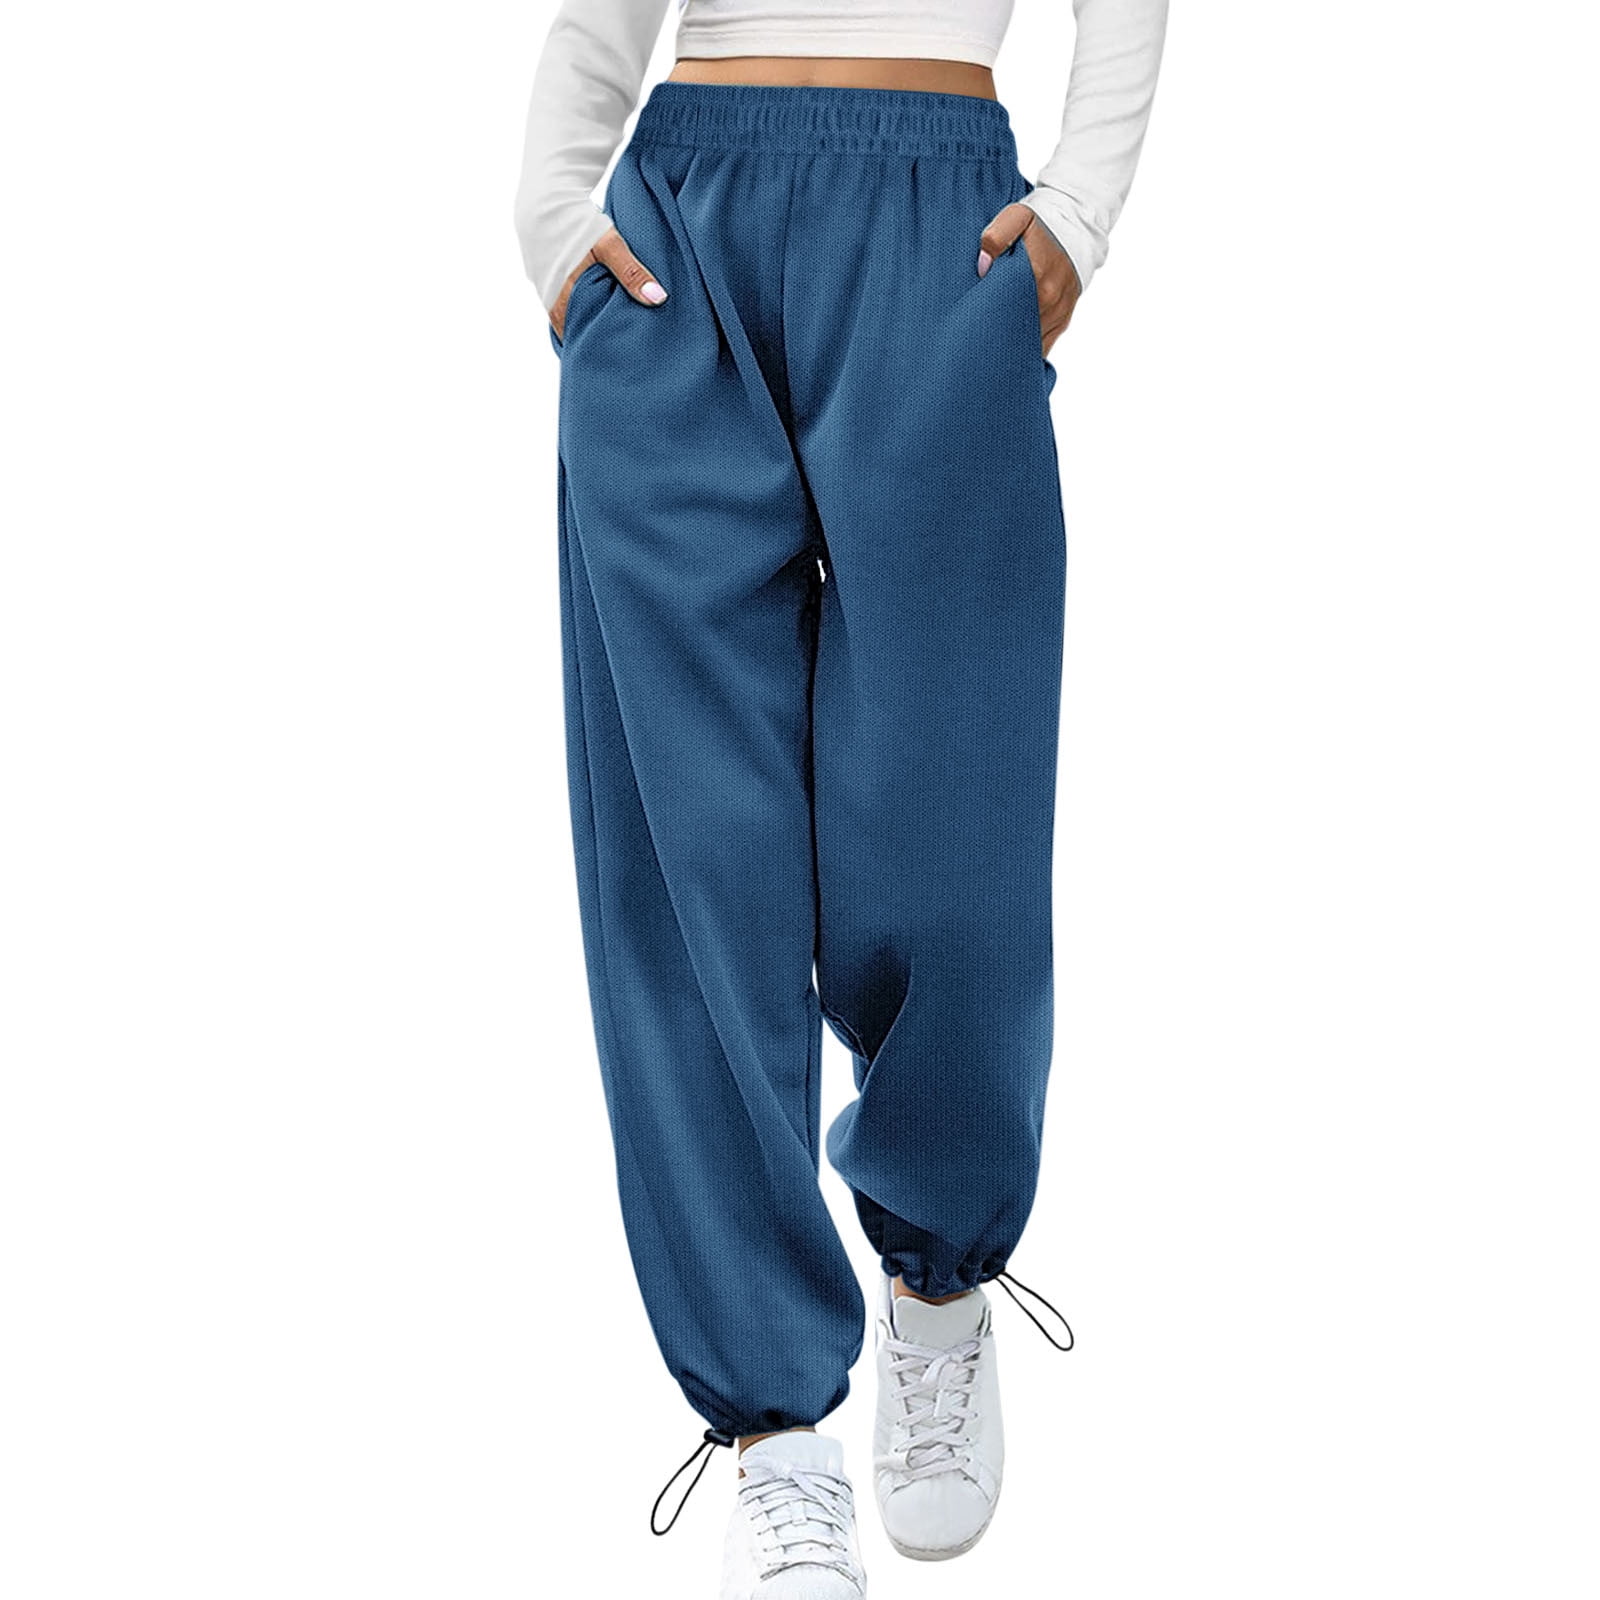 Navy Bamboo & Organic Cotton Stretch Fit Track Pants Women